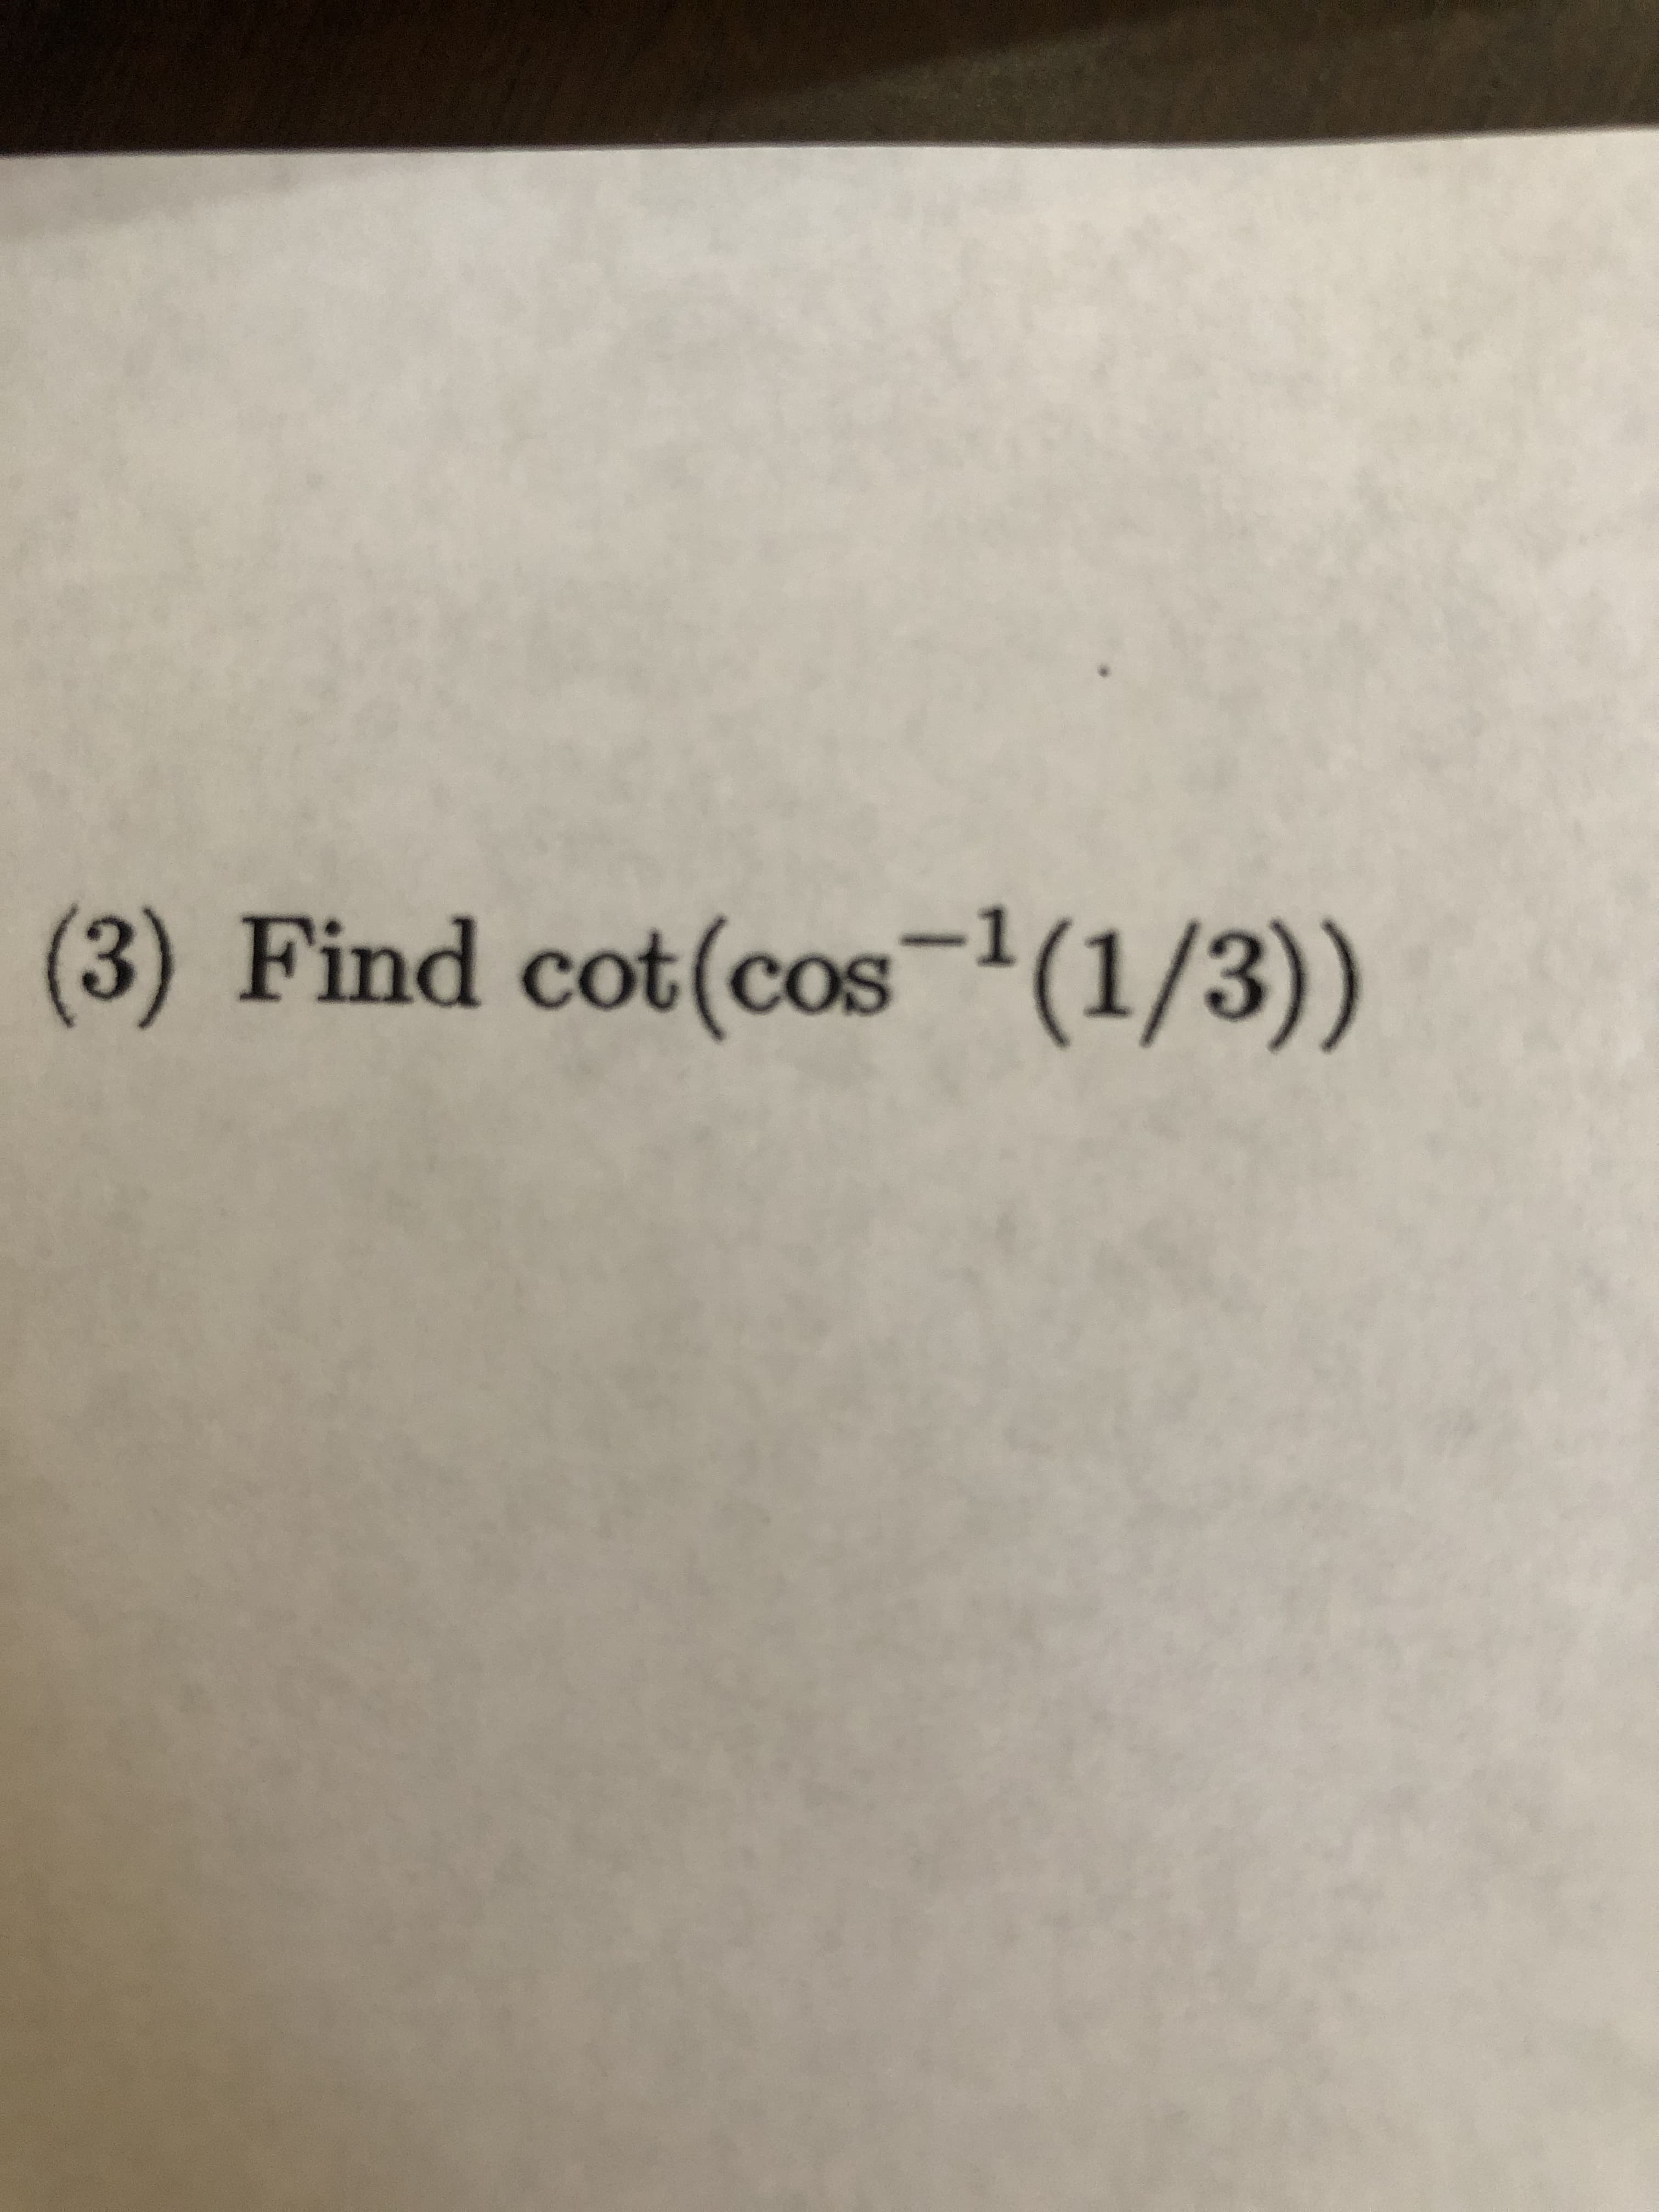 (3) Find cot(cos-(1/3))
OS
